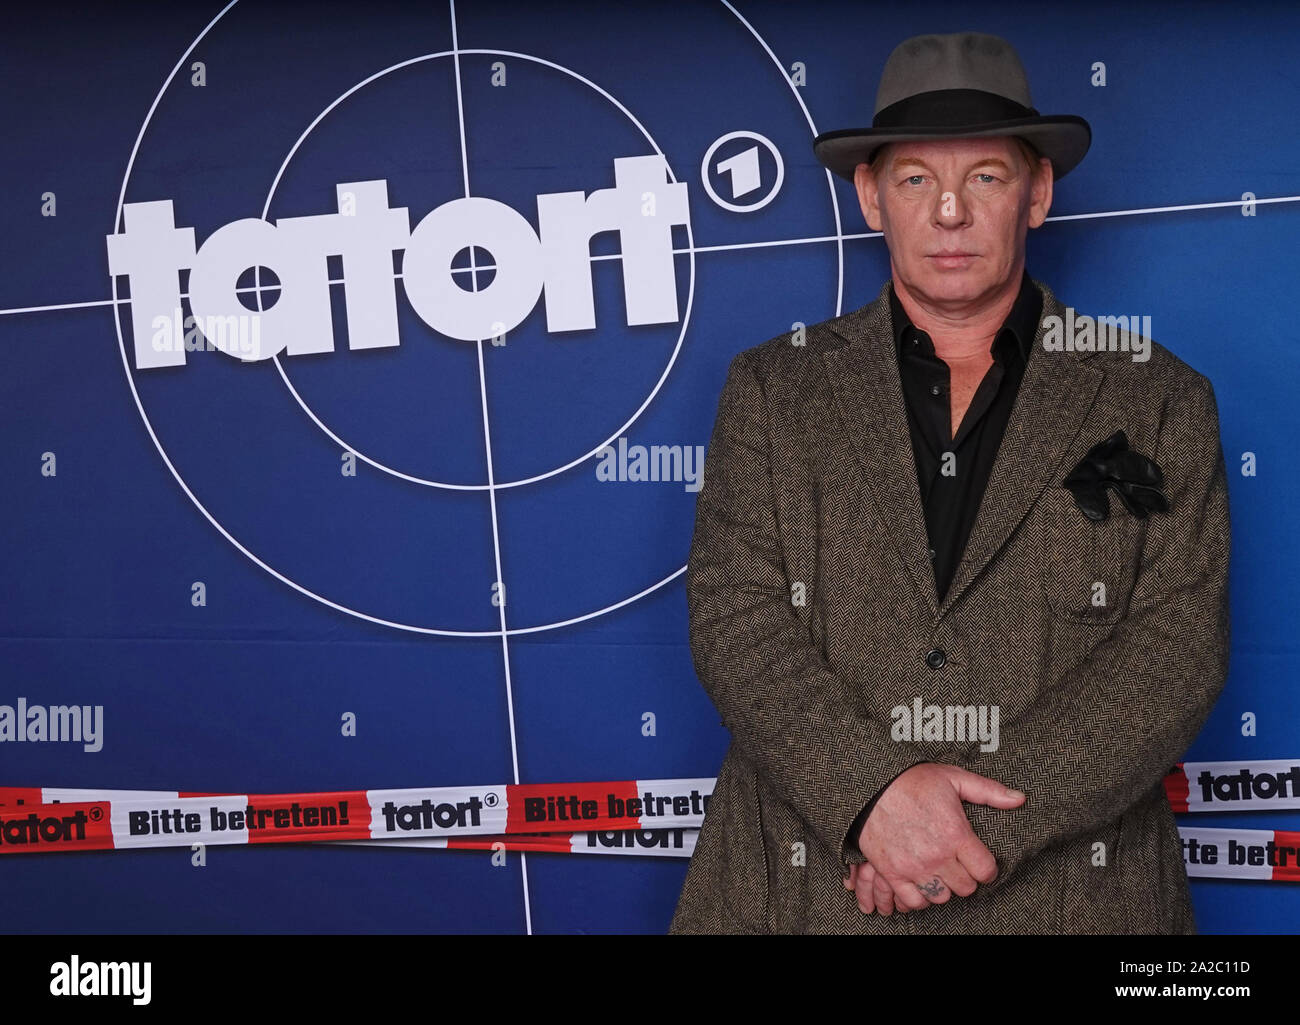 Hamburg, Germany. 02nd Oct, 2019. Ben Becker, as Tatort actor Stefan Tries, during a photo shoot for the ARD crime show Tatort. The Ludwigshafen crime scene will celebrate its 30th birthday in the fall of 2019. Credit: Daniel Bockwoldt/dpa/Alamy Live News Stock Photo